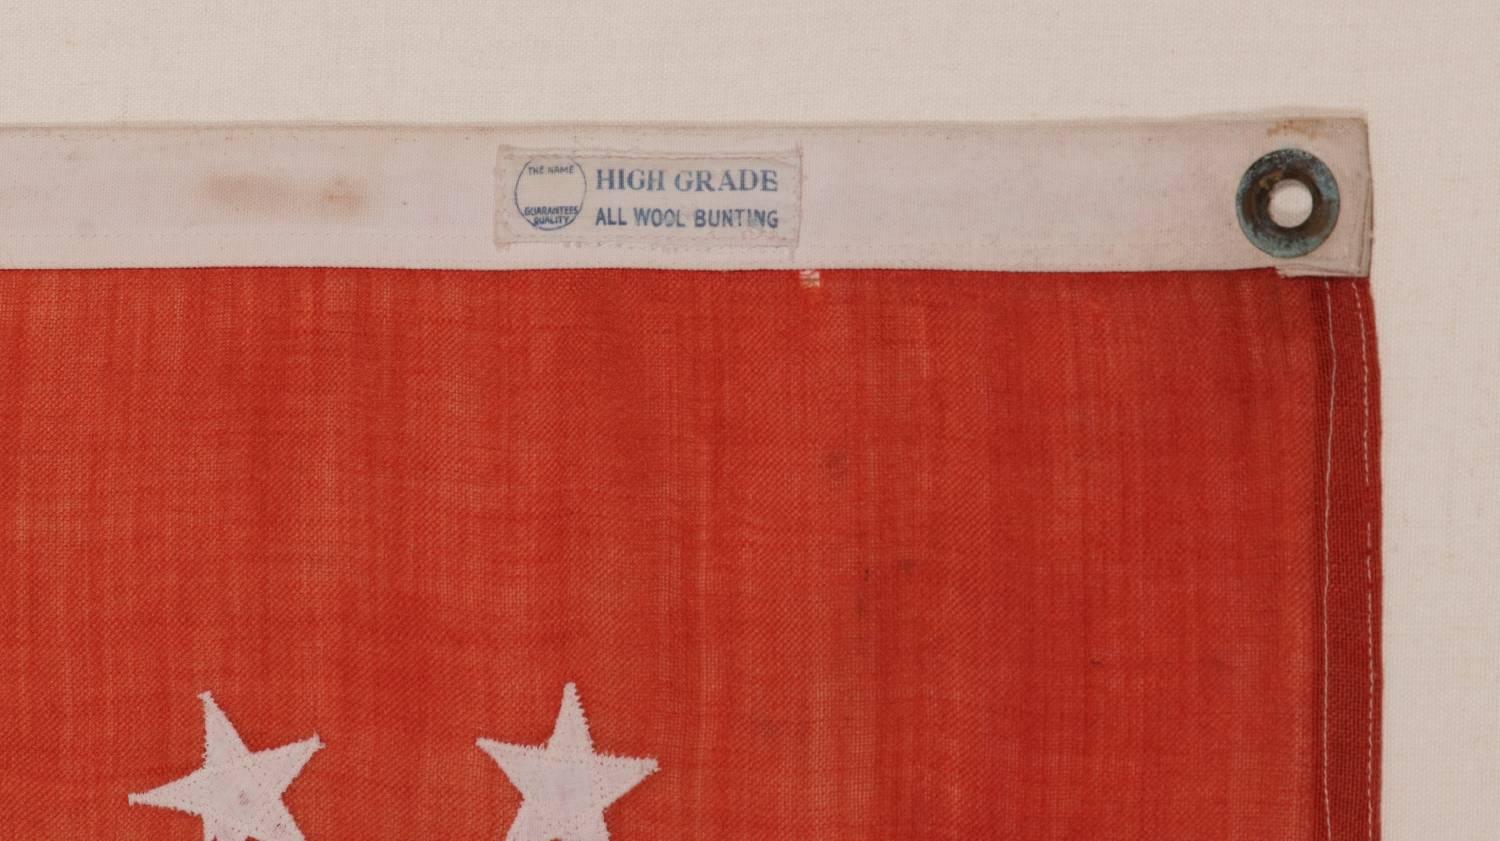 Early 20th Century Power Squadrons Ensign, Made by Annin in New York City